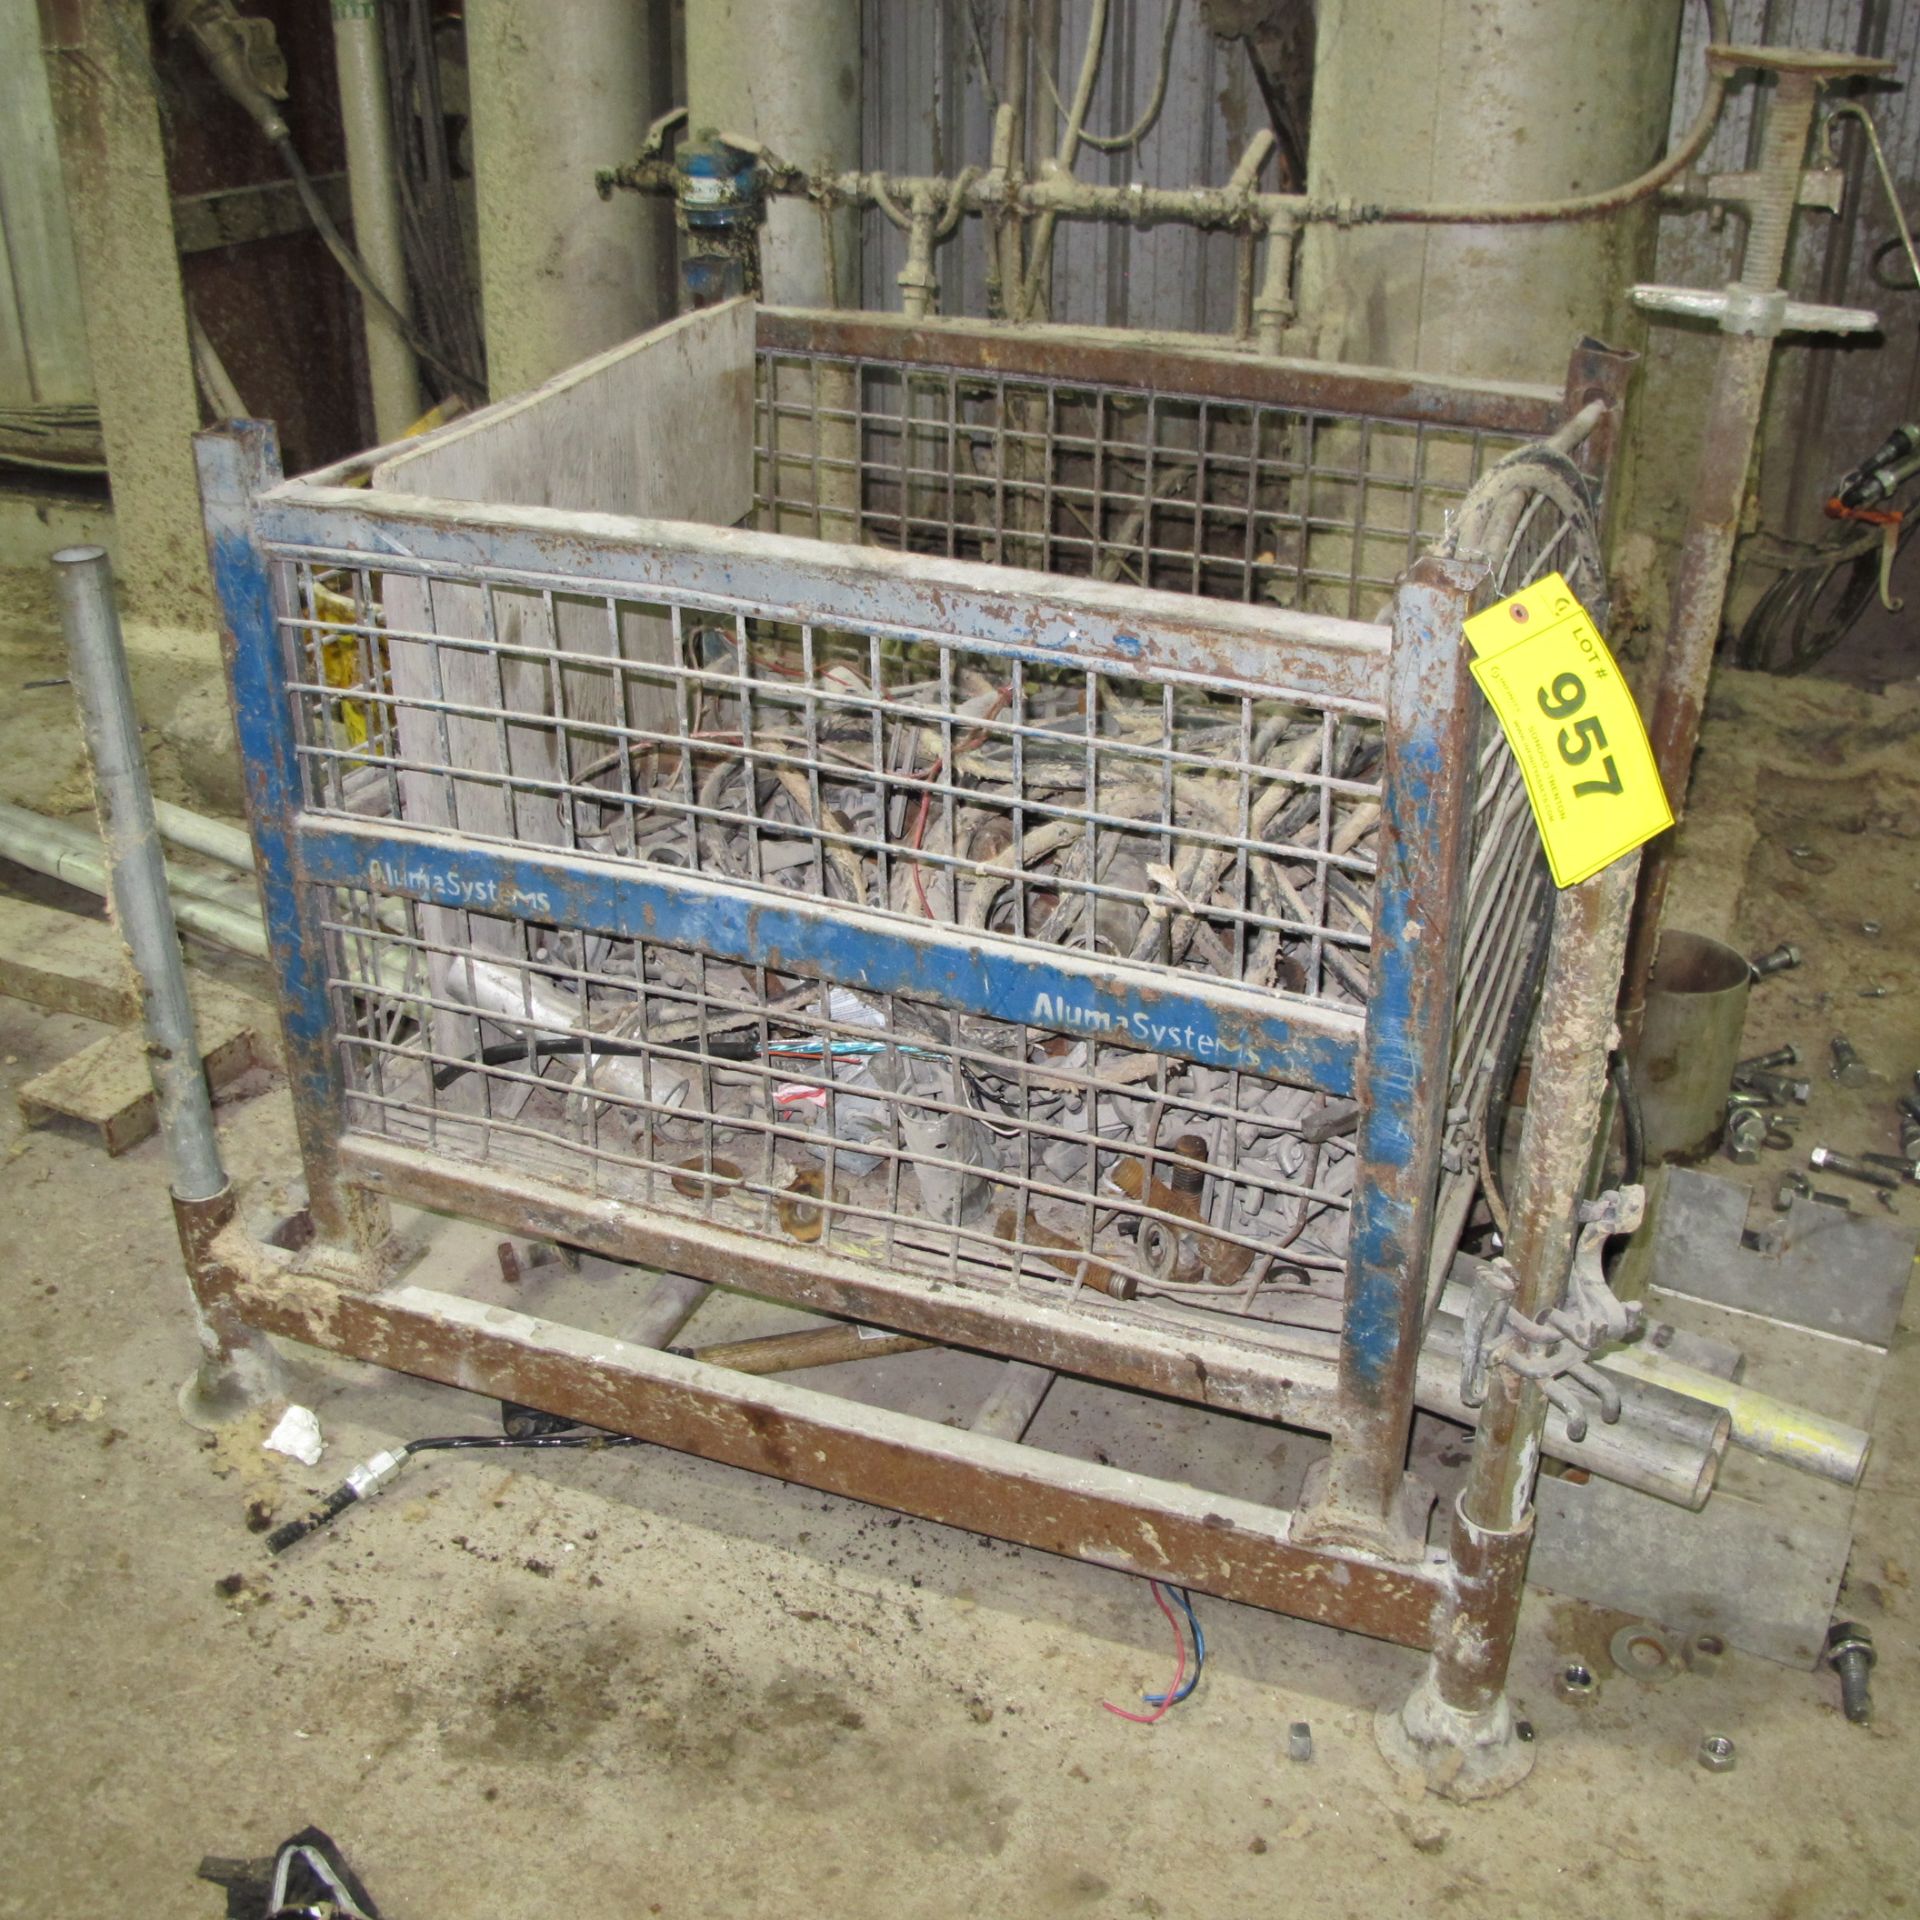 WIRE BASKET W/ METAL PIPE AND CONTENTS, PORTABLE WIRE REEL, EYEWASH STATION/STAND, 2-DOOR METAL